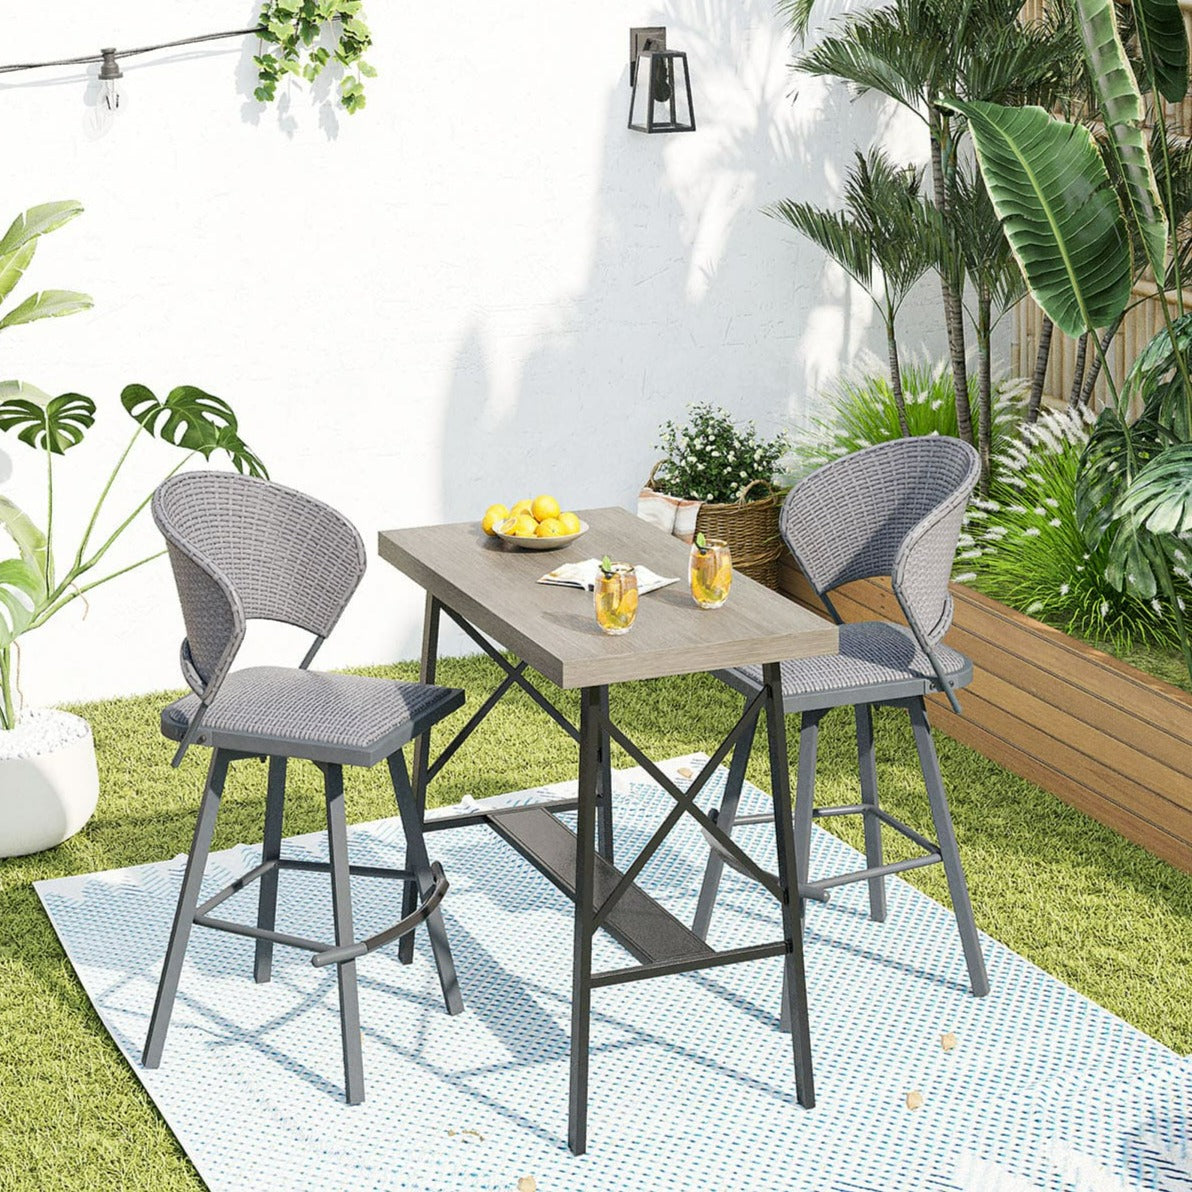 Vicllax 3 PCS Outdoor Bar Set, Patio Wicker Bar Chairs and Large Rectangular Bar Table